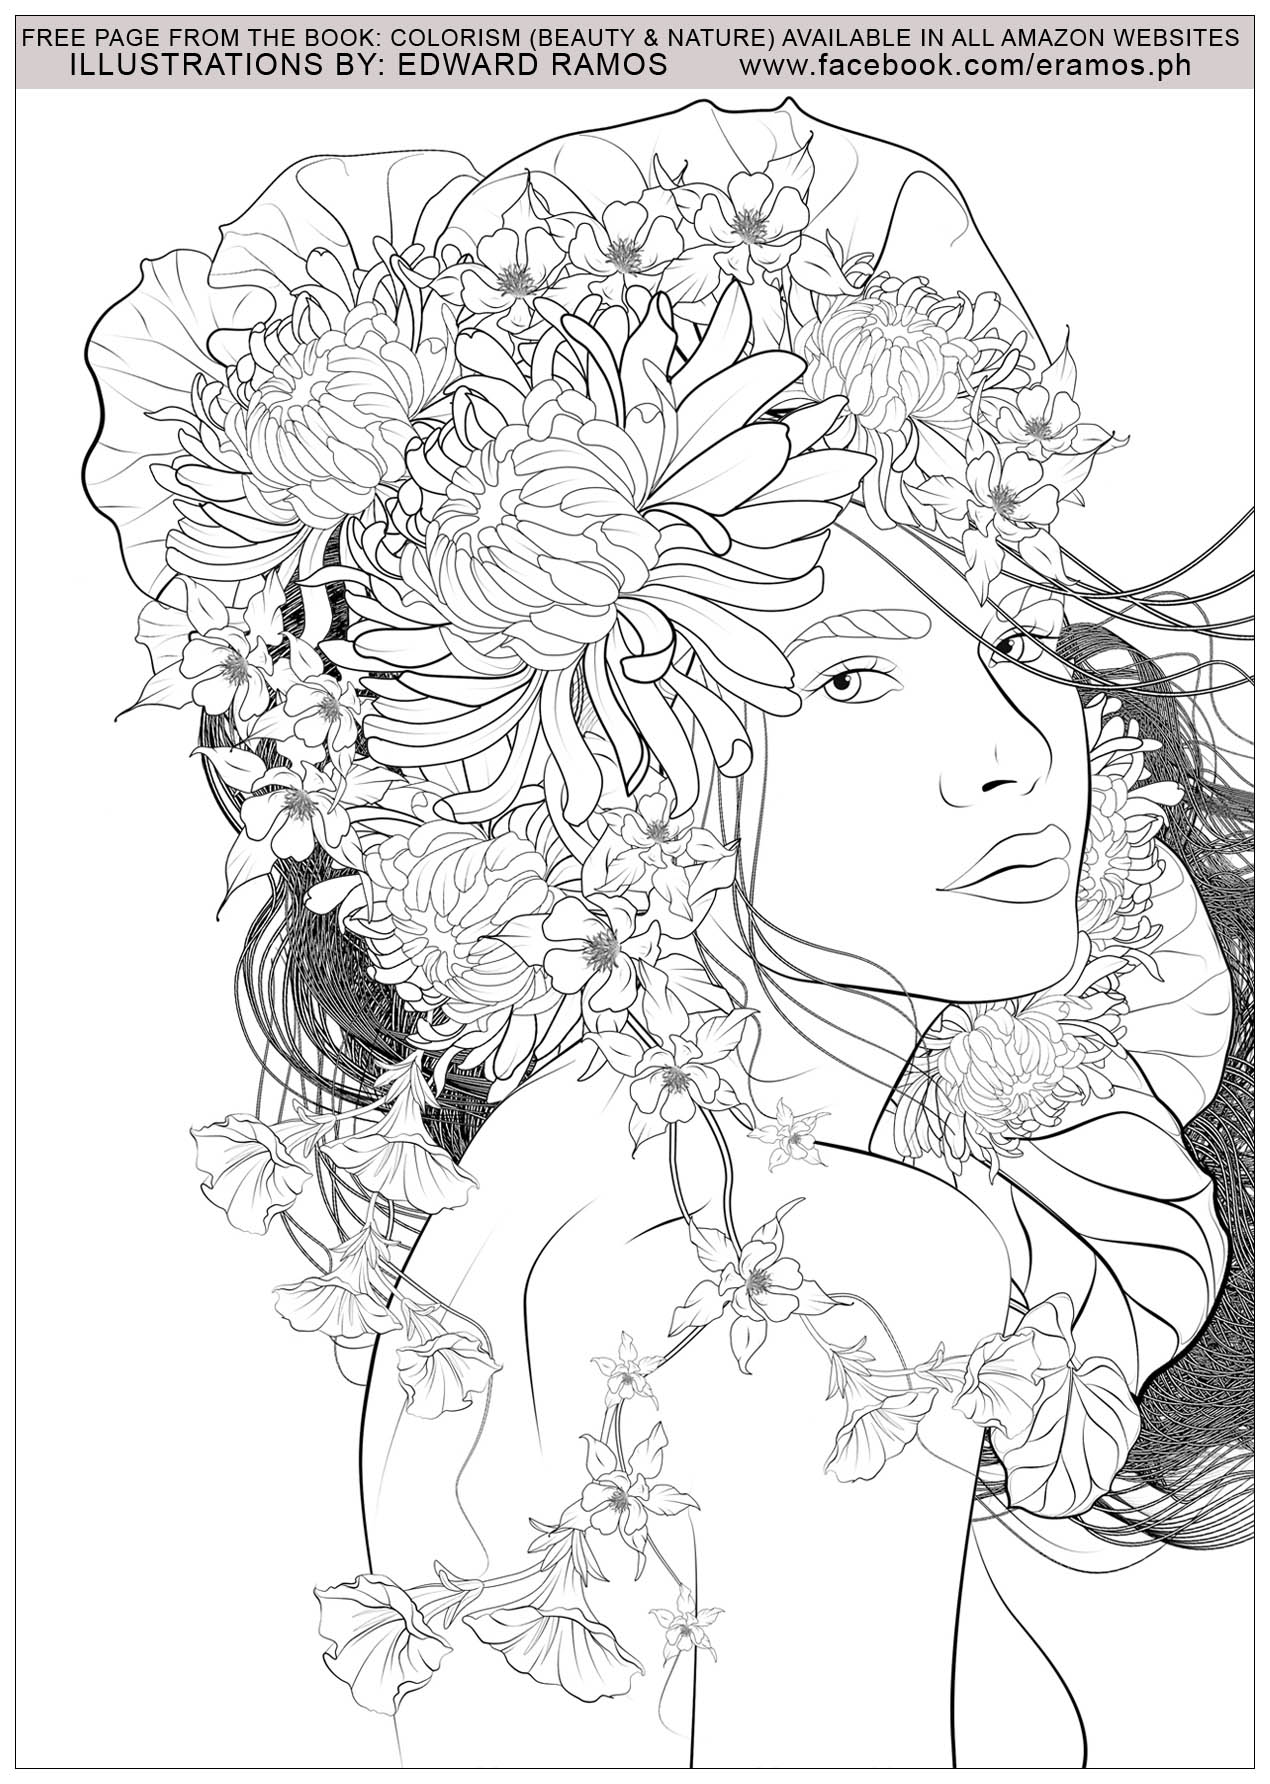 Illustration from the book Colorism - Beauty & Nature by Edward Ramos - 1, Artist : Edward Ramos